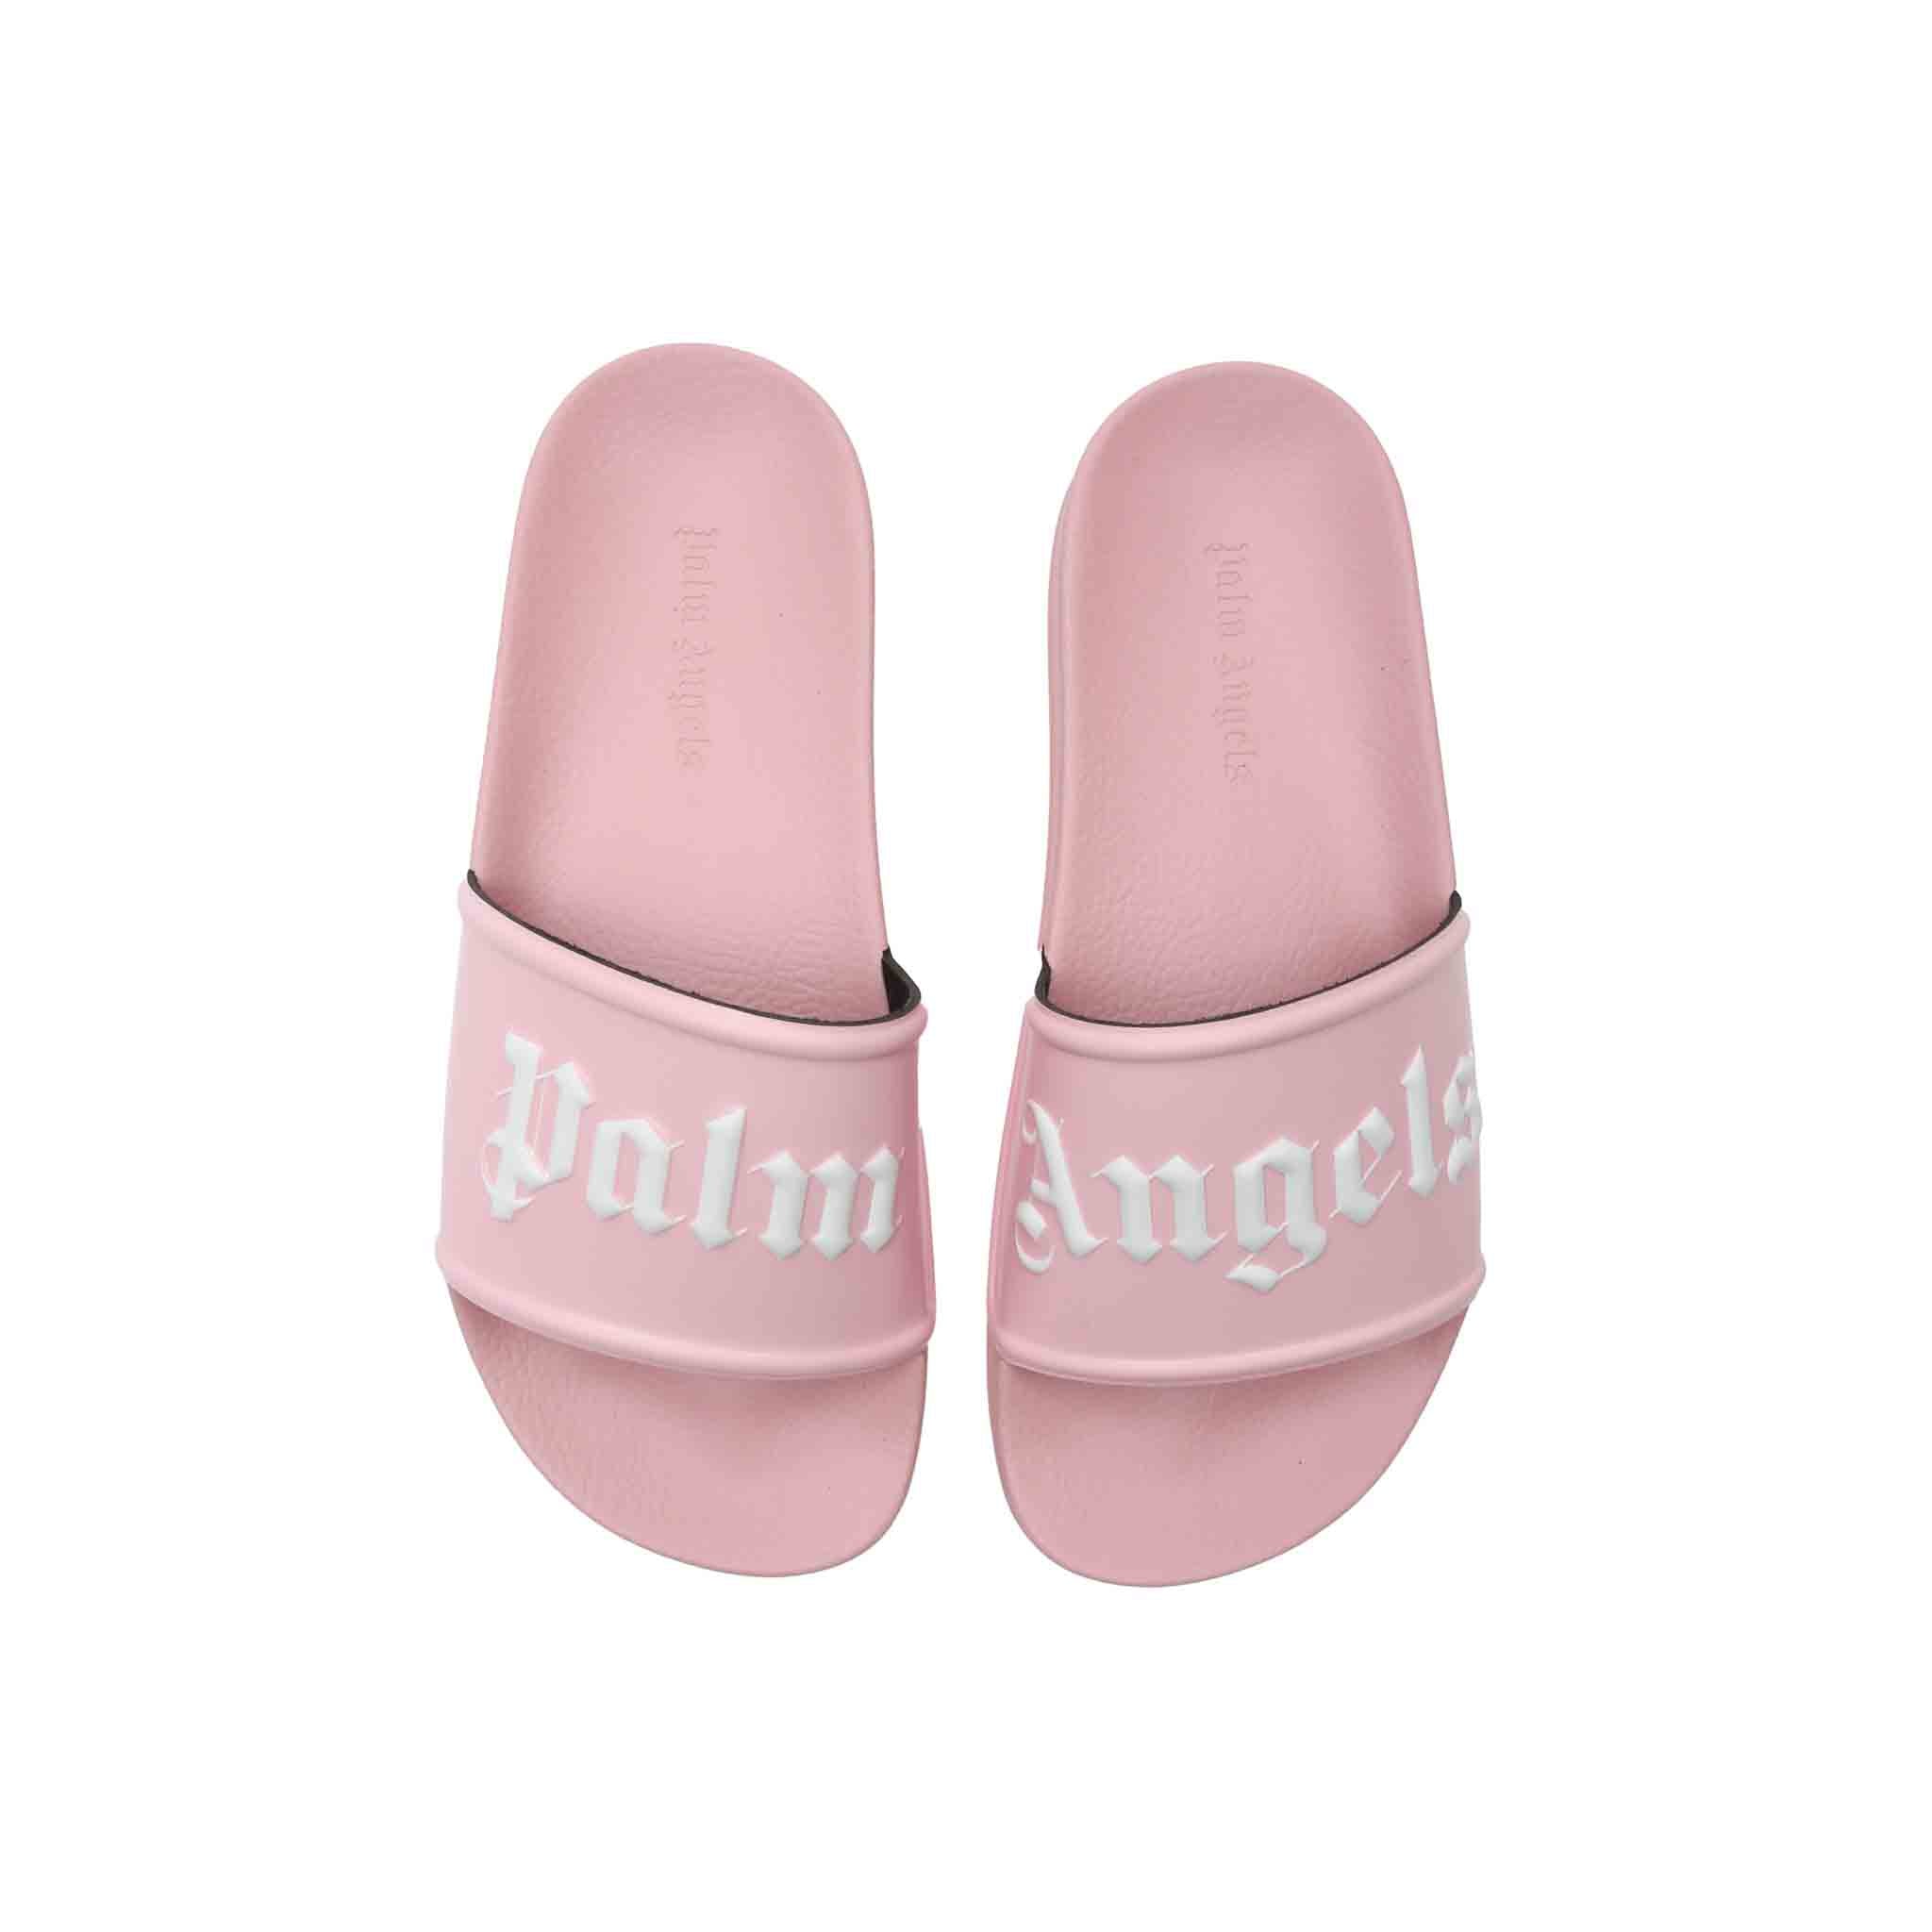 Palm Angels Sliders in Light Pink